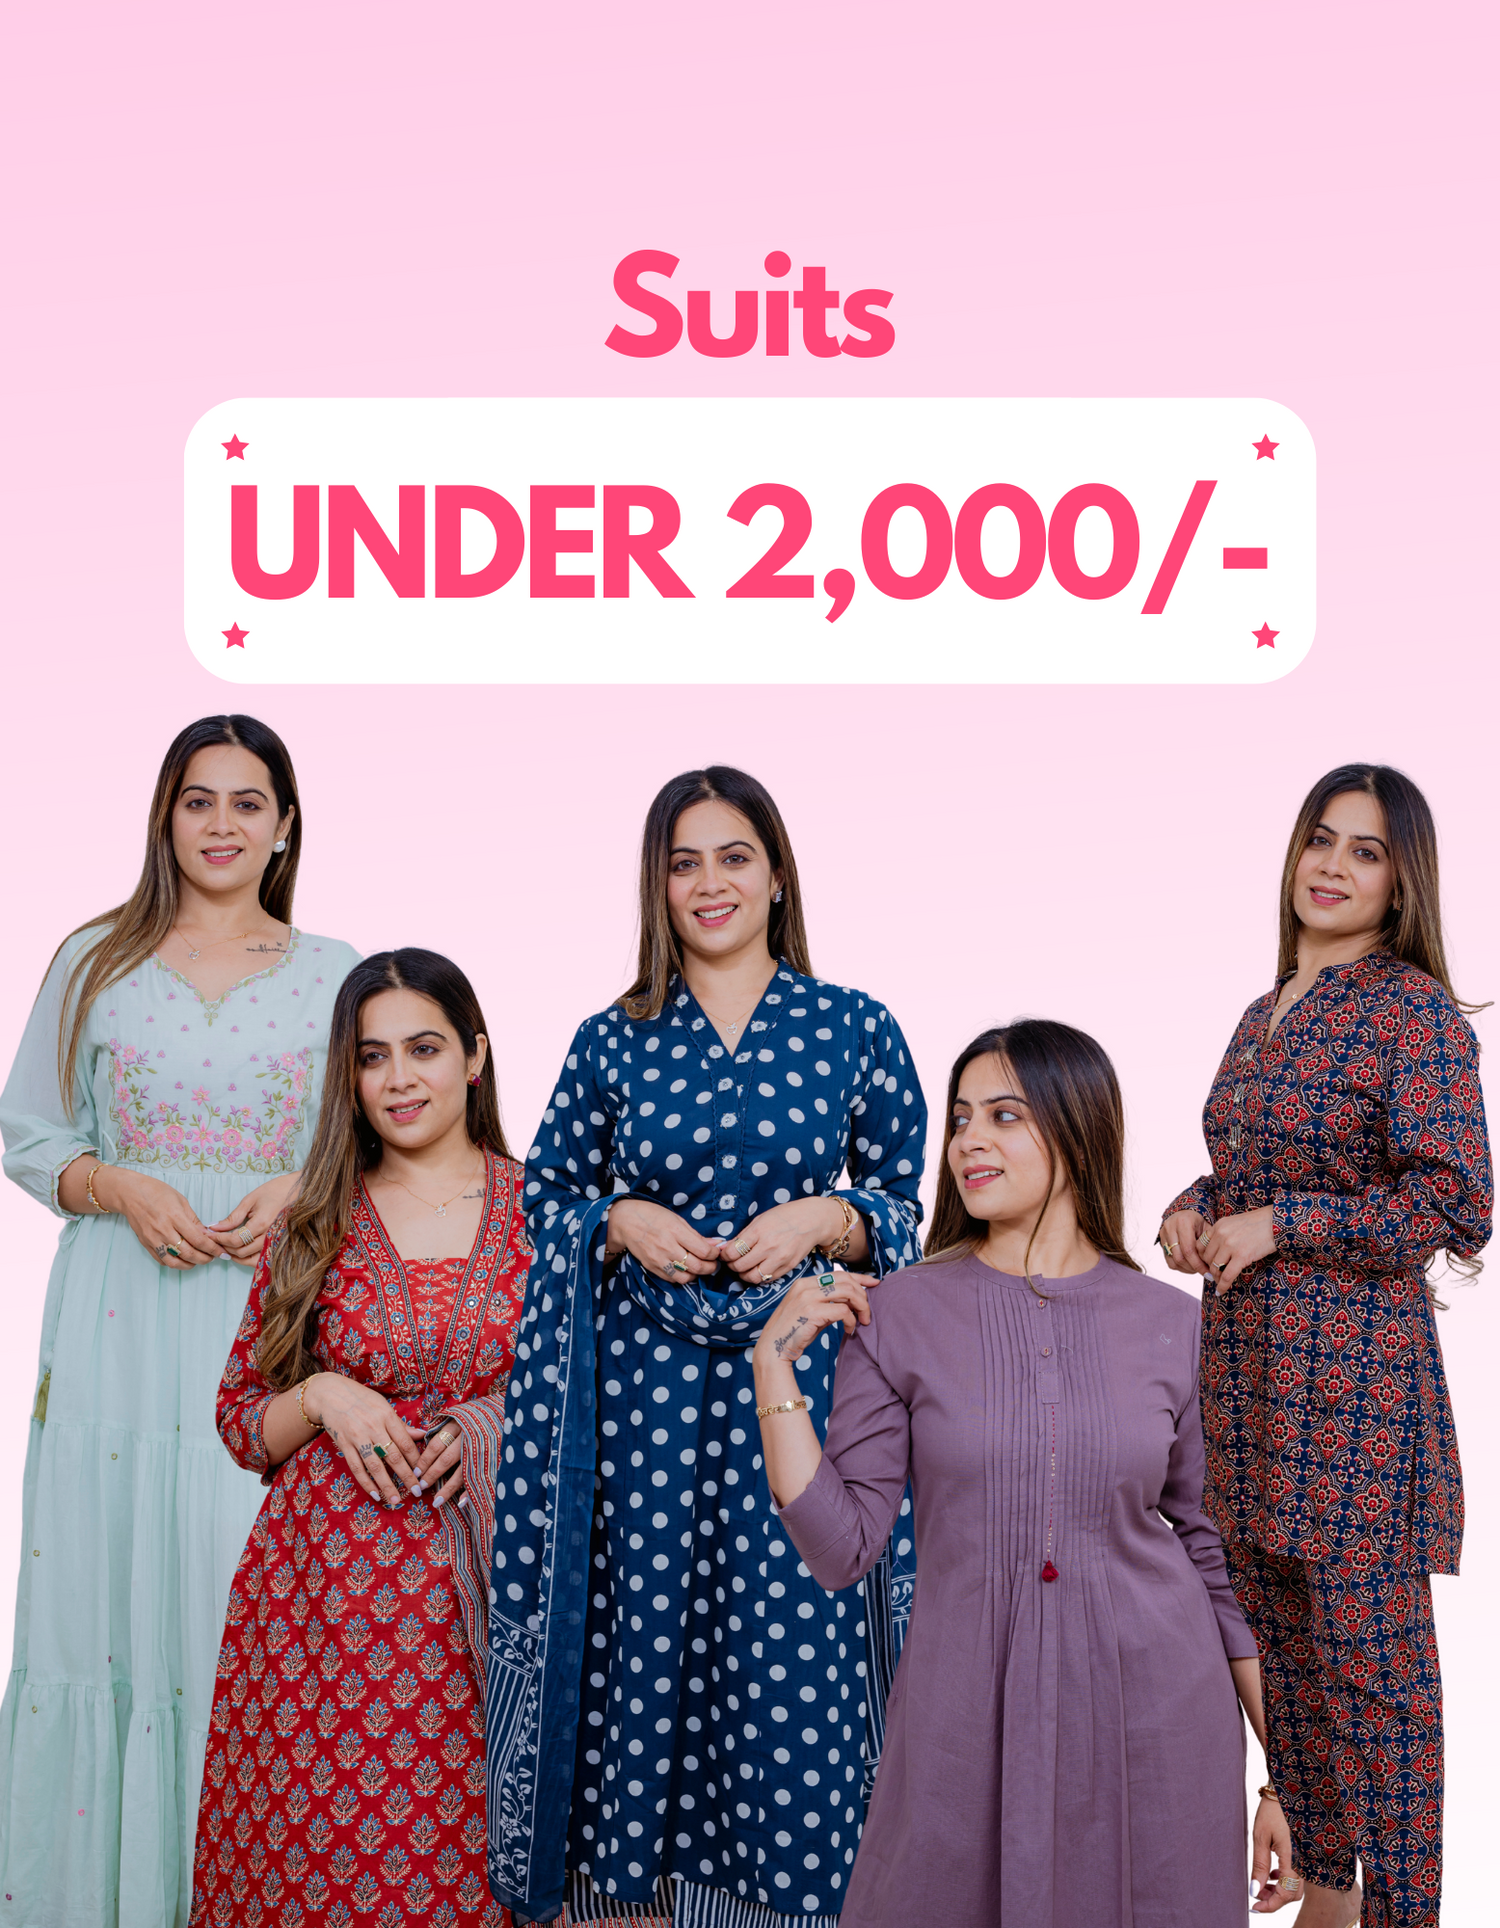 Under Rs. 2,000/-